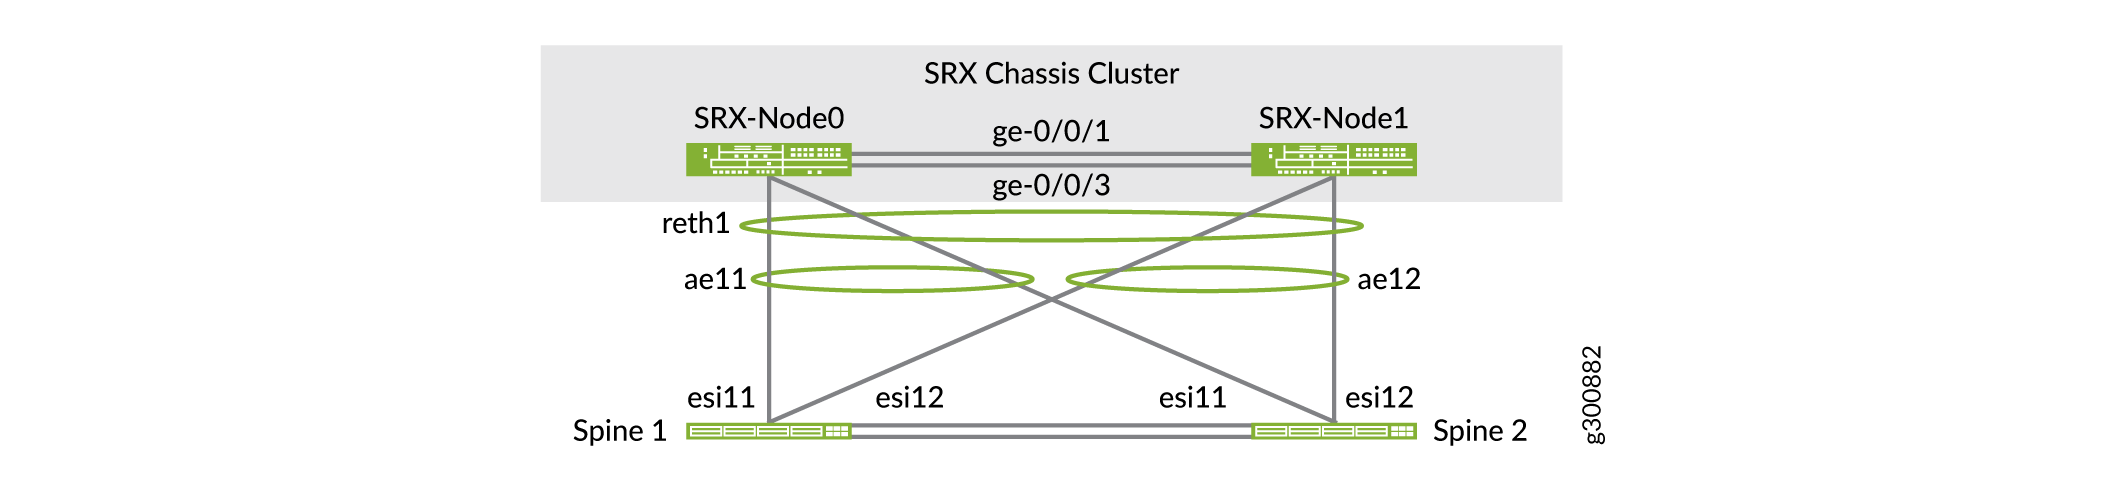 Overlay Topology of SRX Cluster